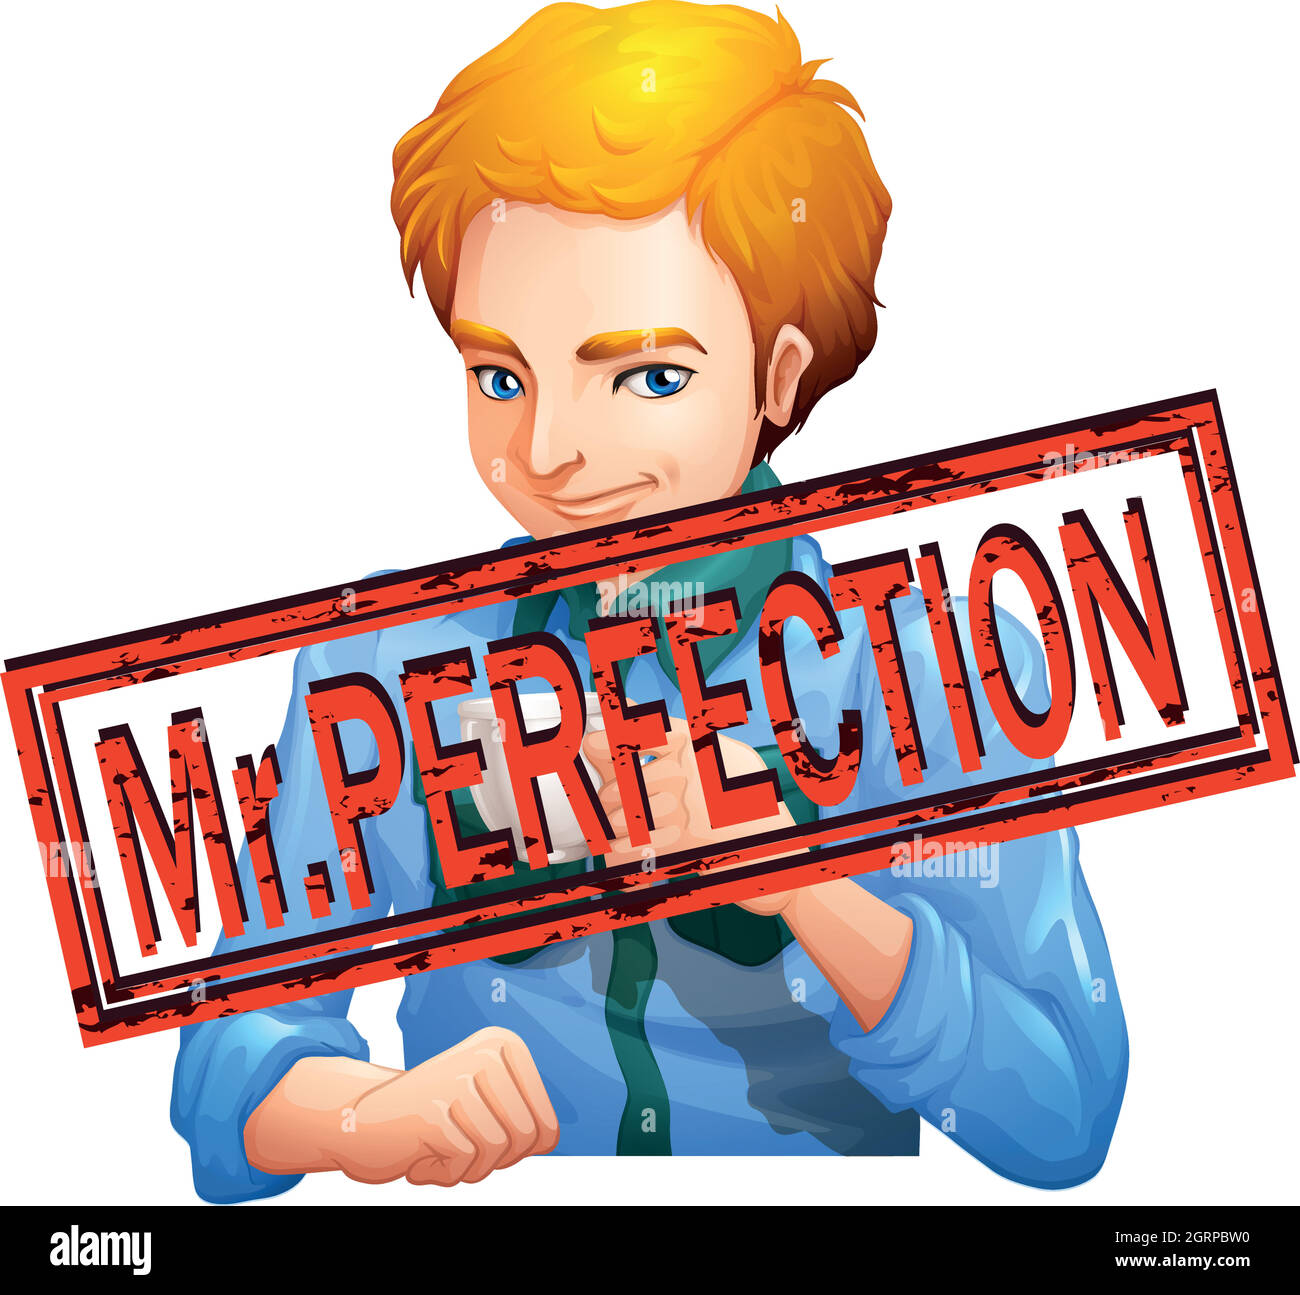 Mr perfection with text Stock Vector